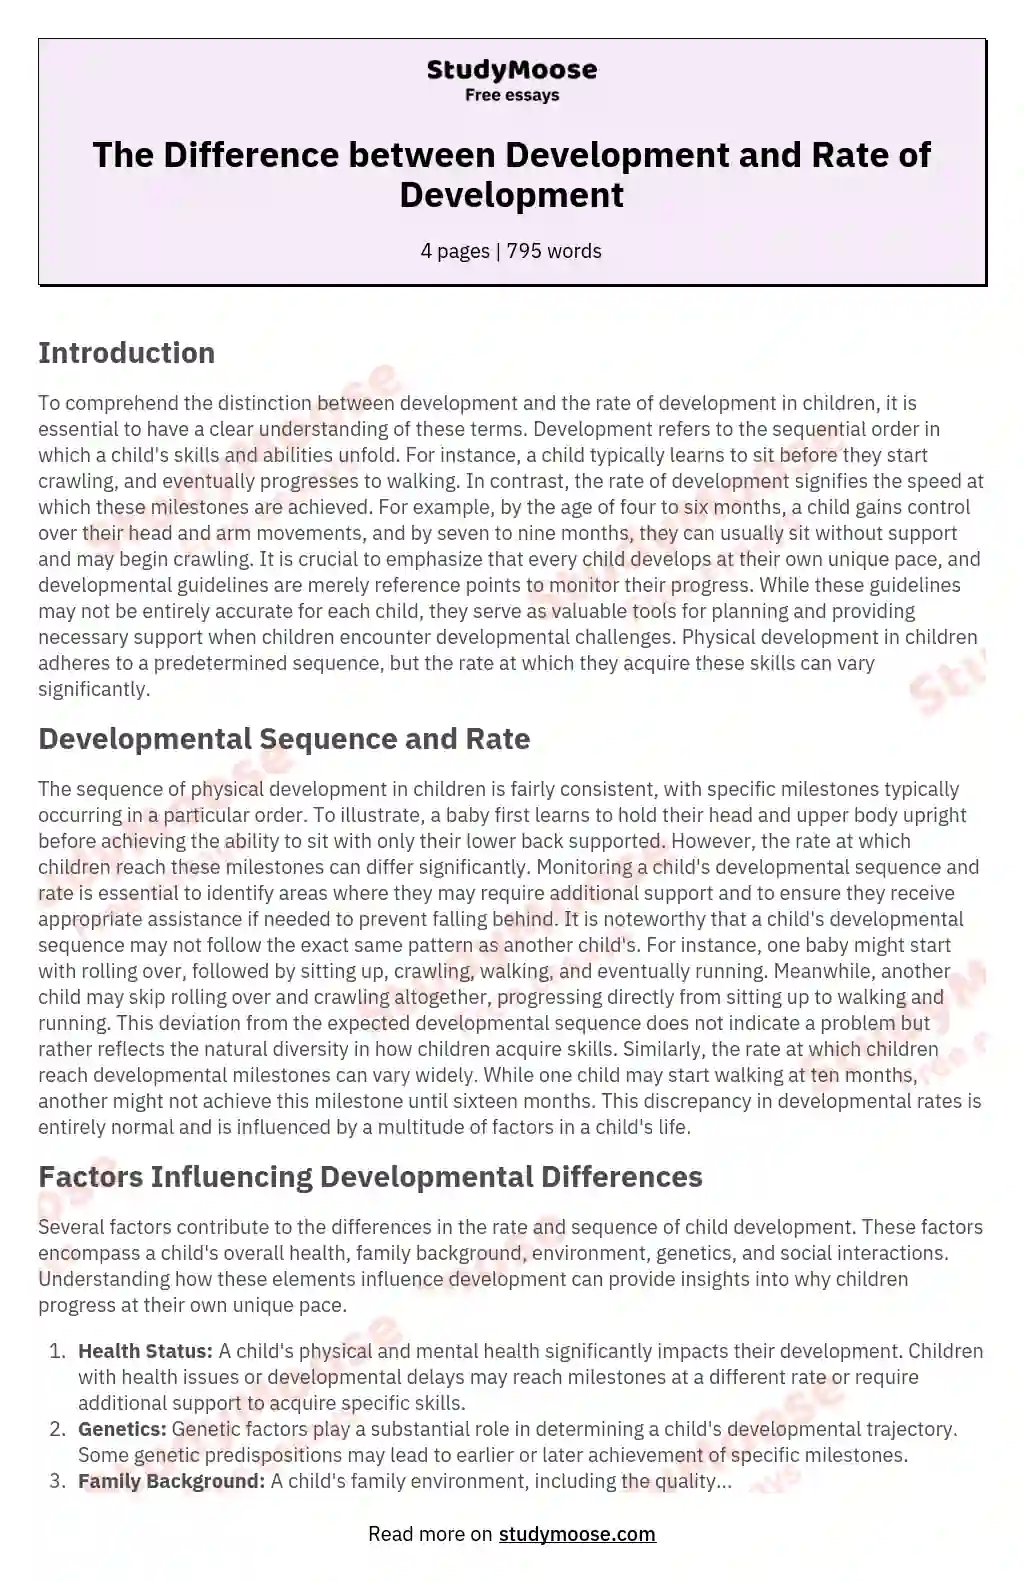 The Difference between Development and Rate of Development essay